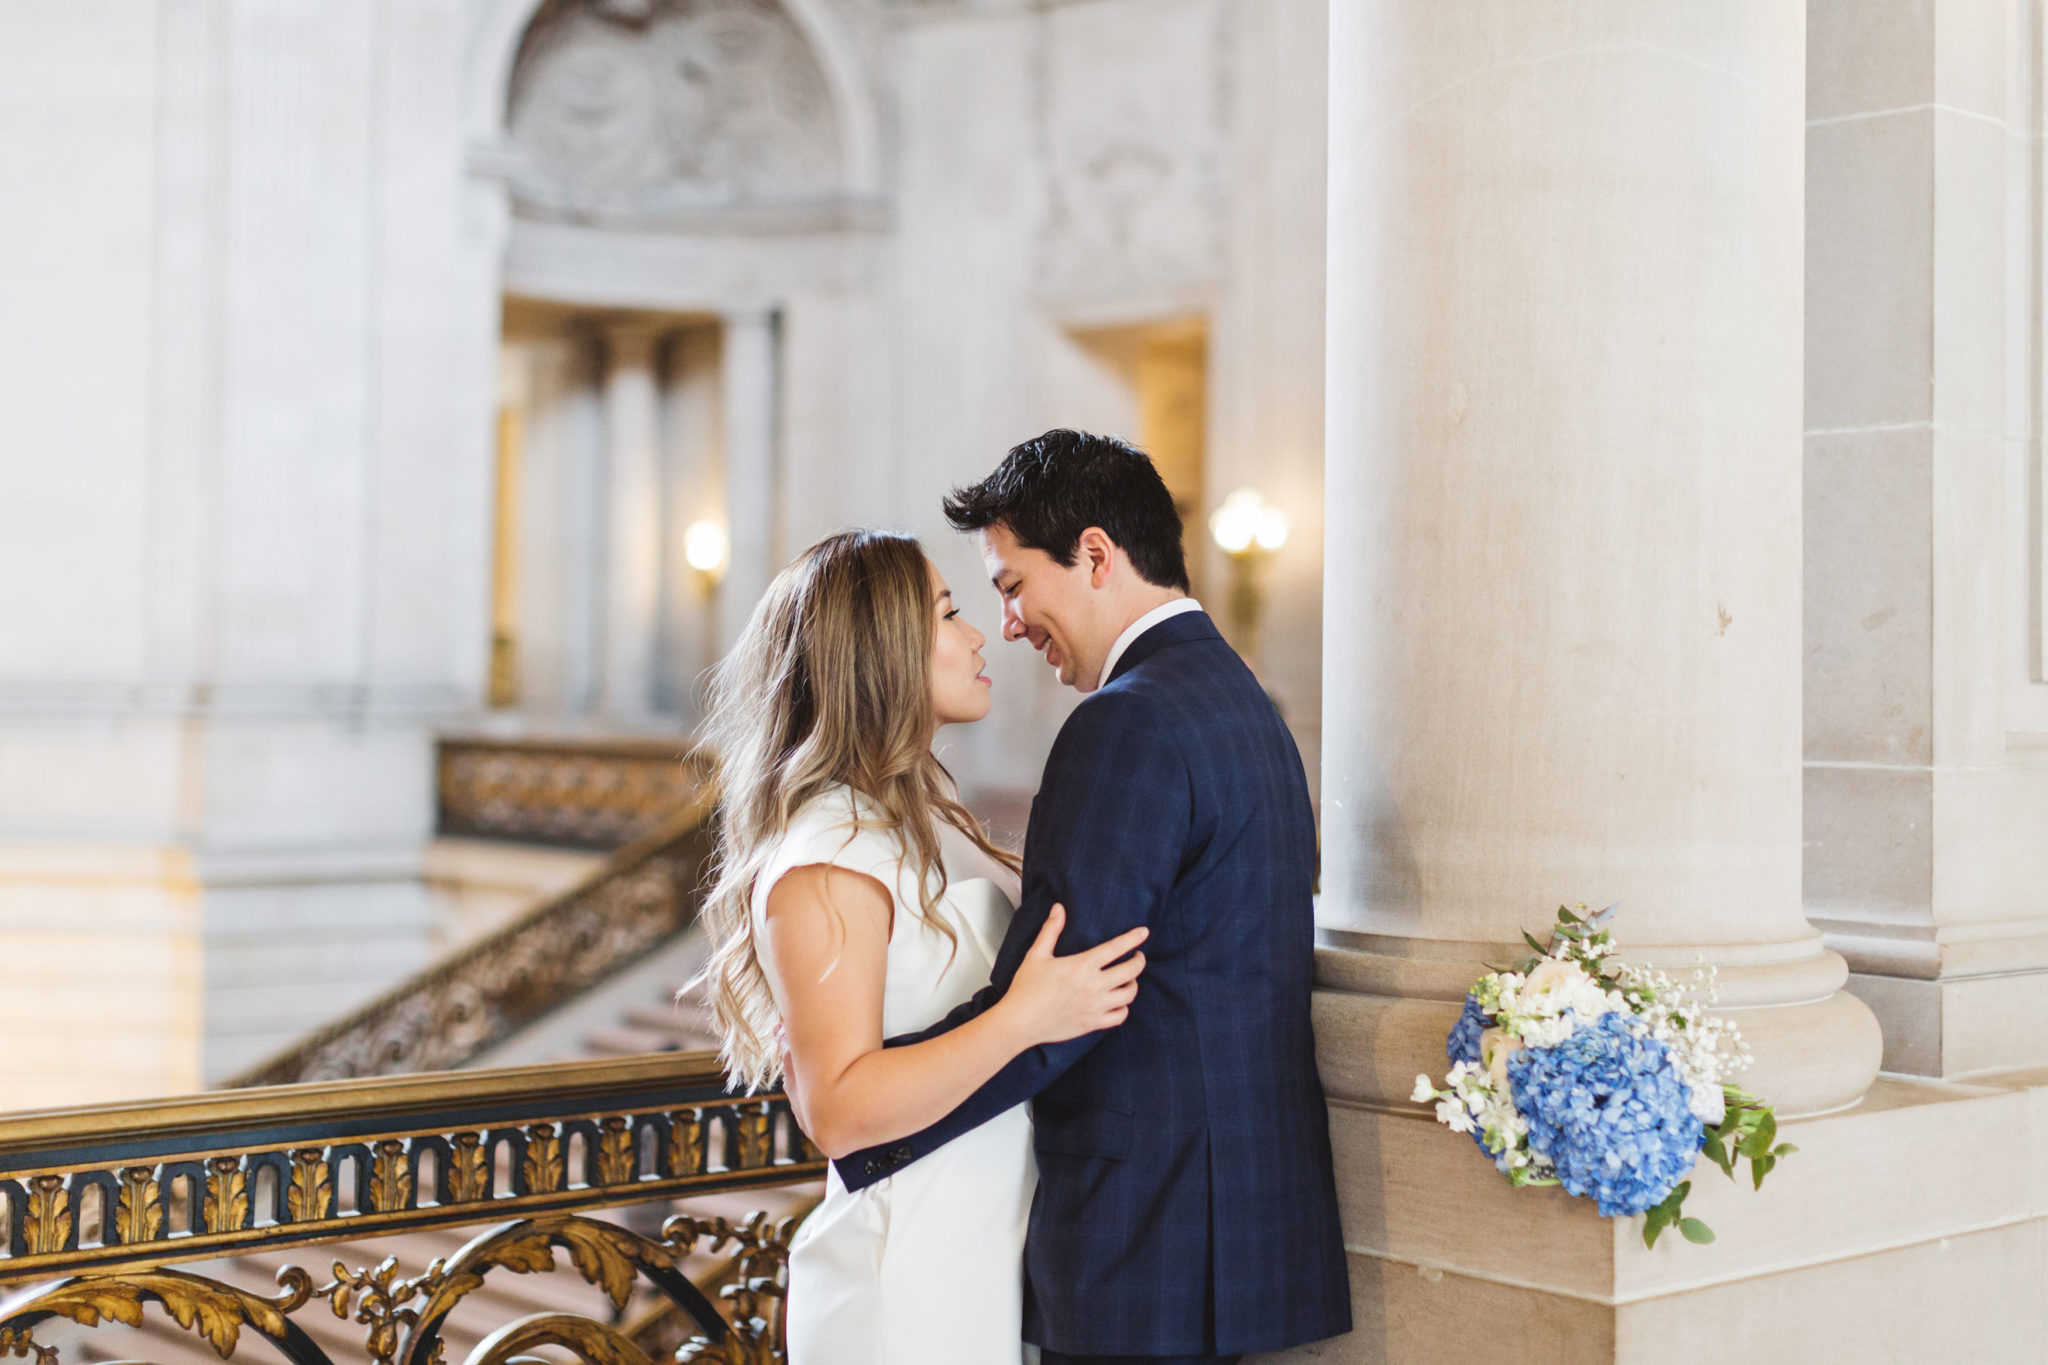 A sweet San Francisco City Hall wedding of a Vietnamese American couple, as they pose for pictures on the 2nd floor of the iconic San Francisco landmark on their wedding day | Photo by Zoe Larkin Photography